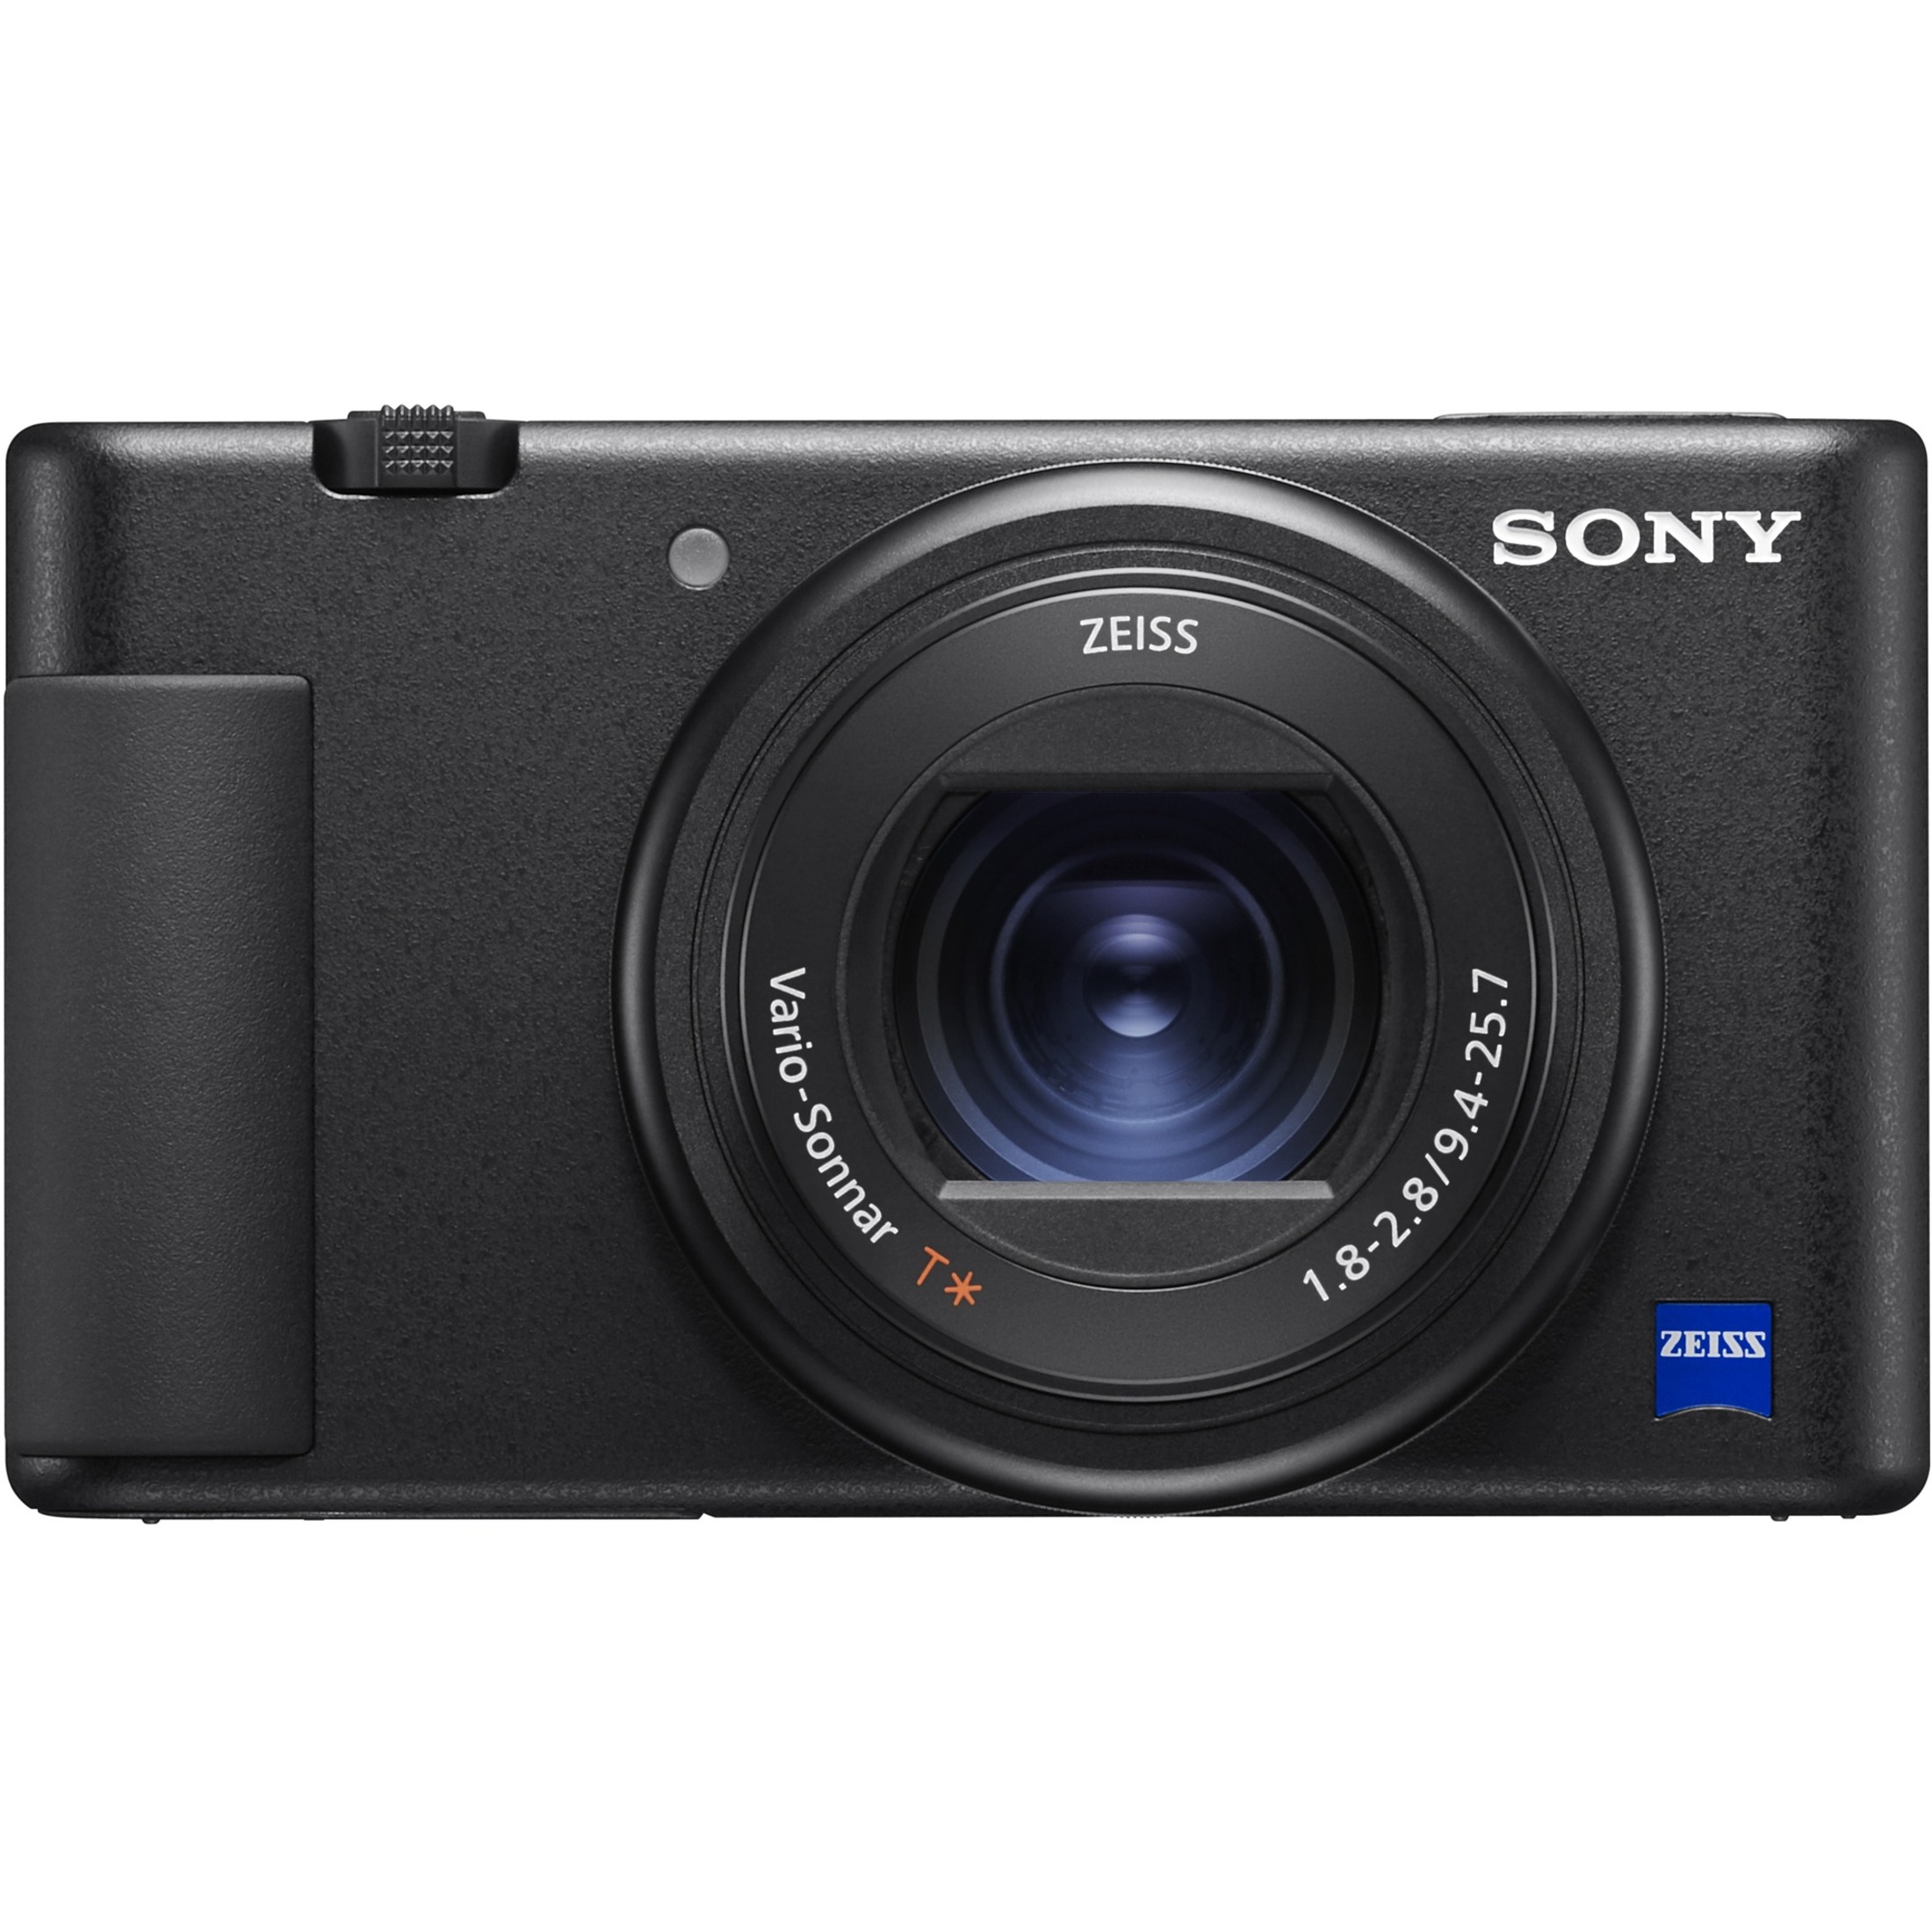 Sony ZV-1 20.1 Megapixel Compact Camera, Black - image 3 of 29